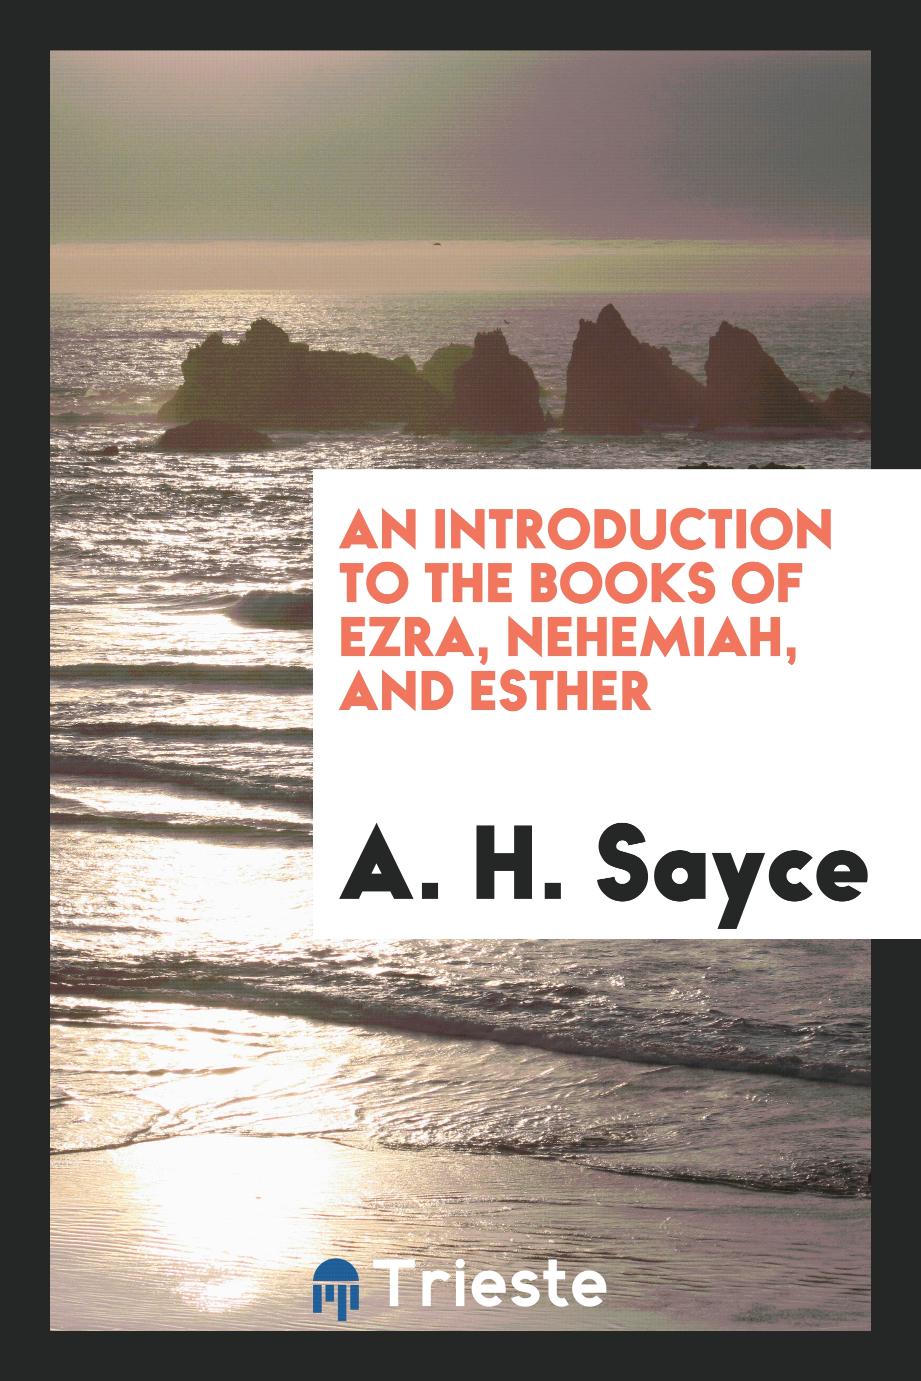 An Introduction to the Books of Ezra, Nehemiah, and Esther